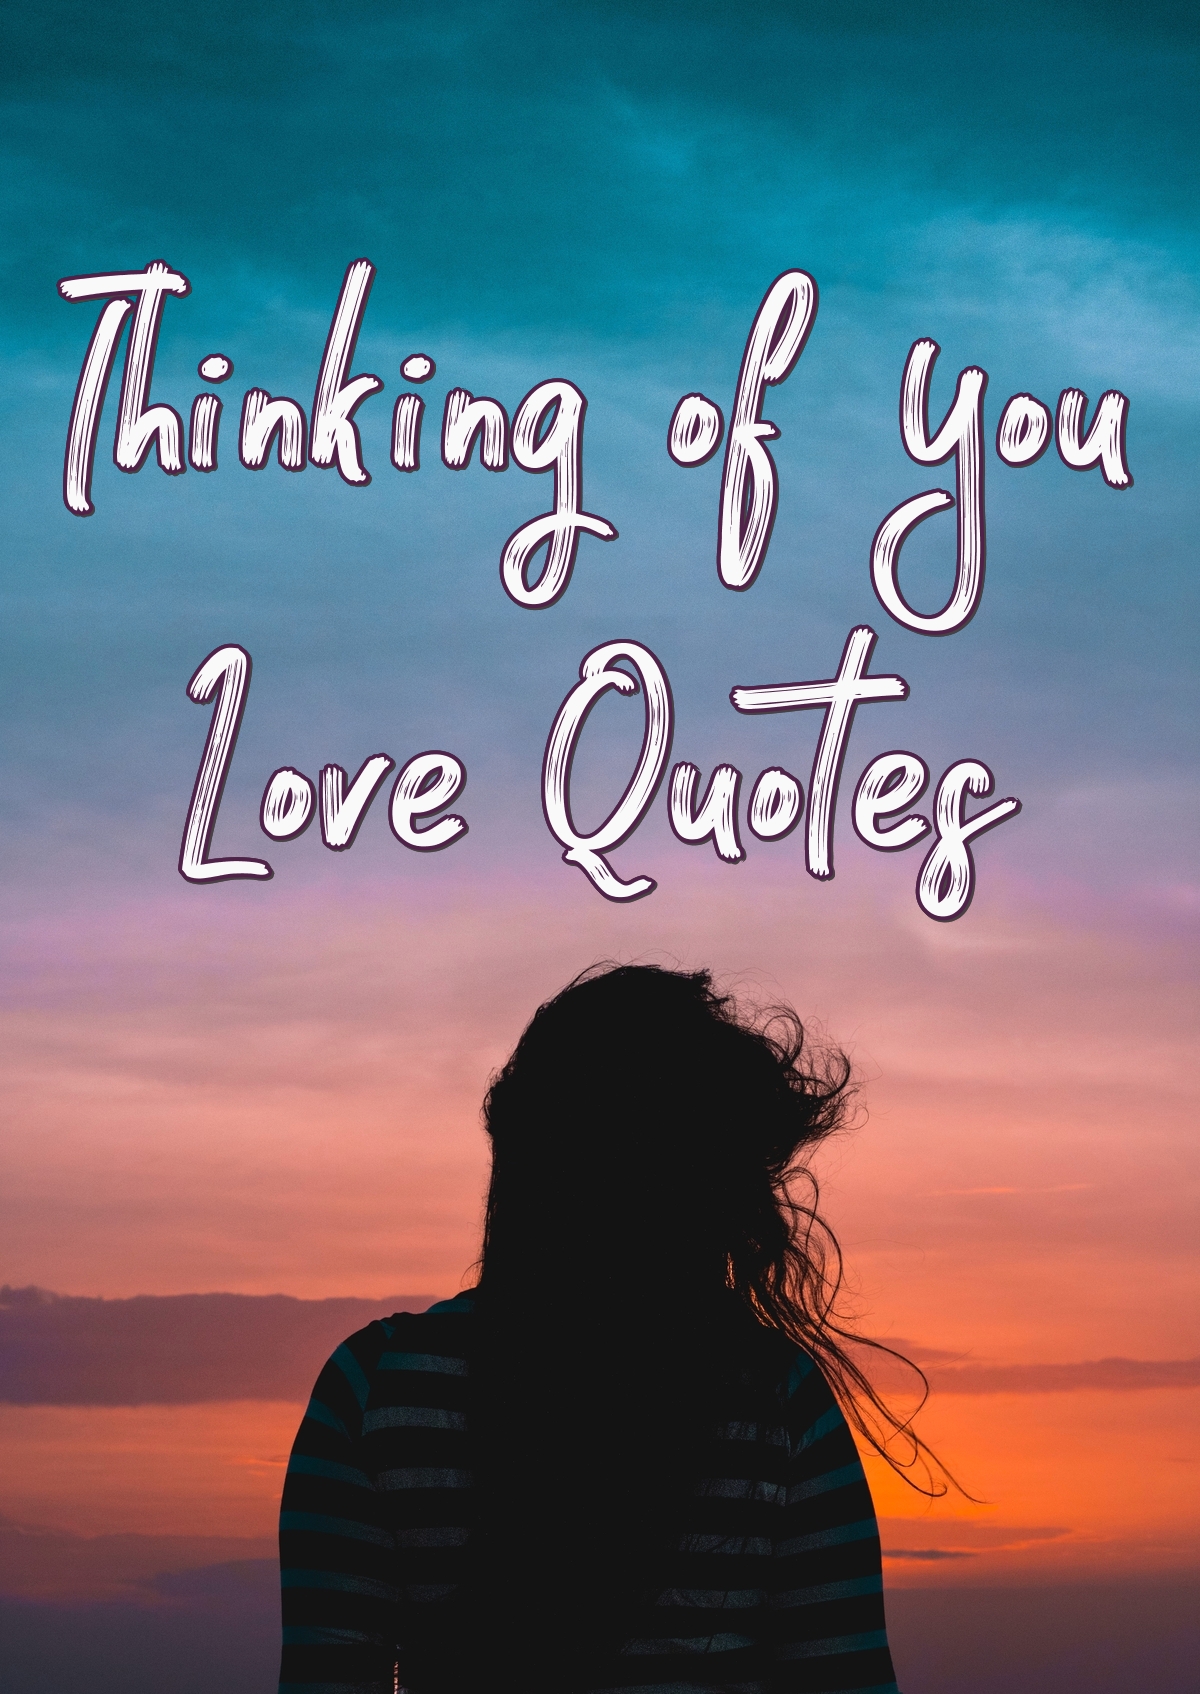 48 Thinking of You Quotes (For Him and Her)  PureLoveQuotes